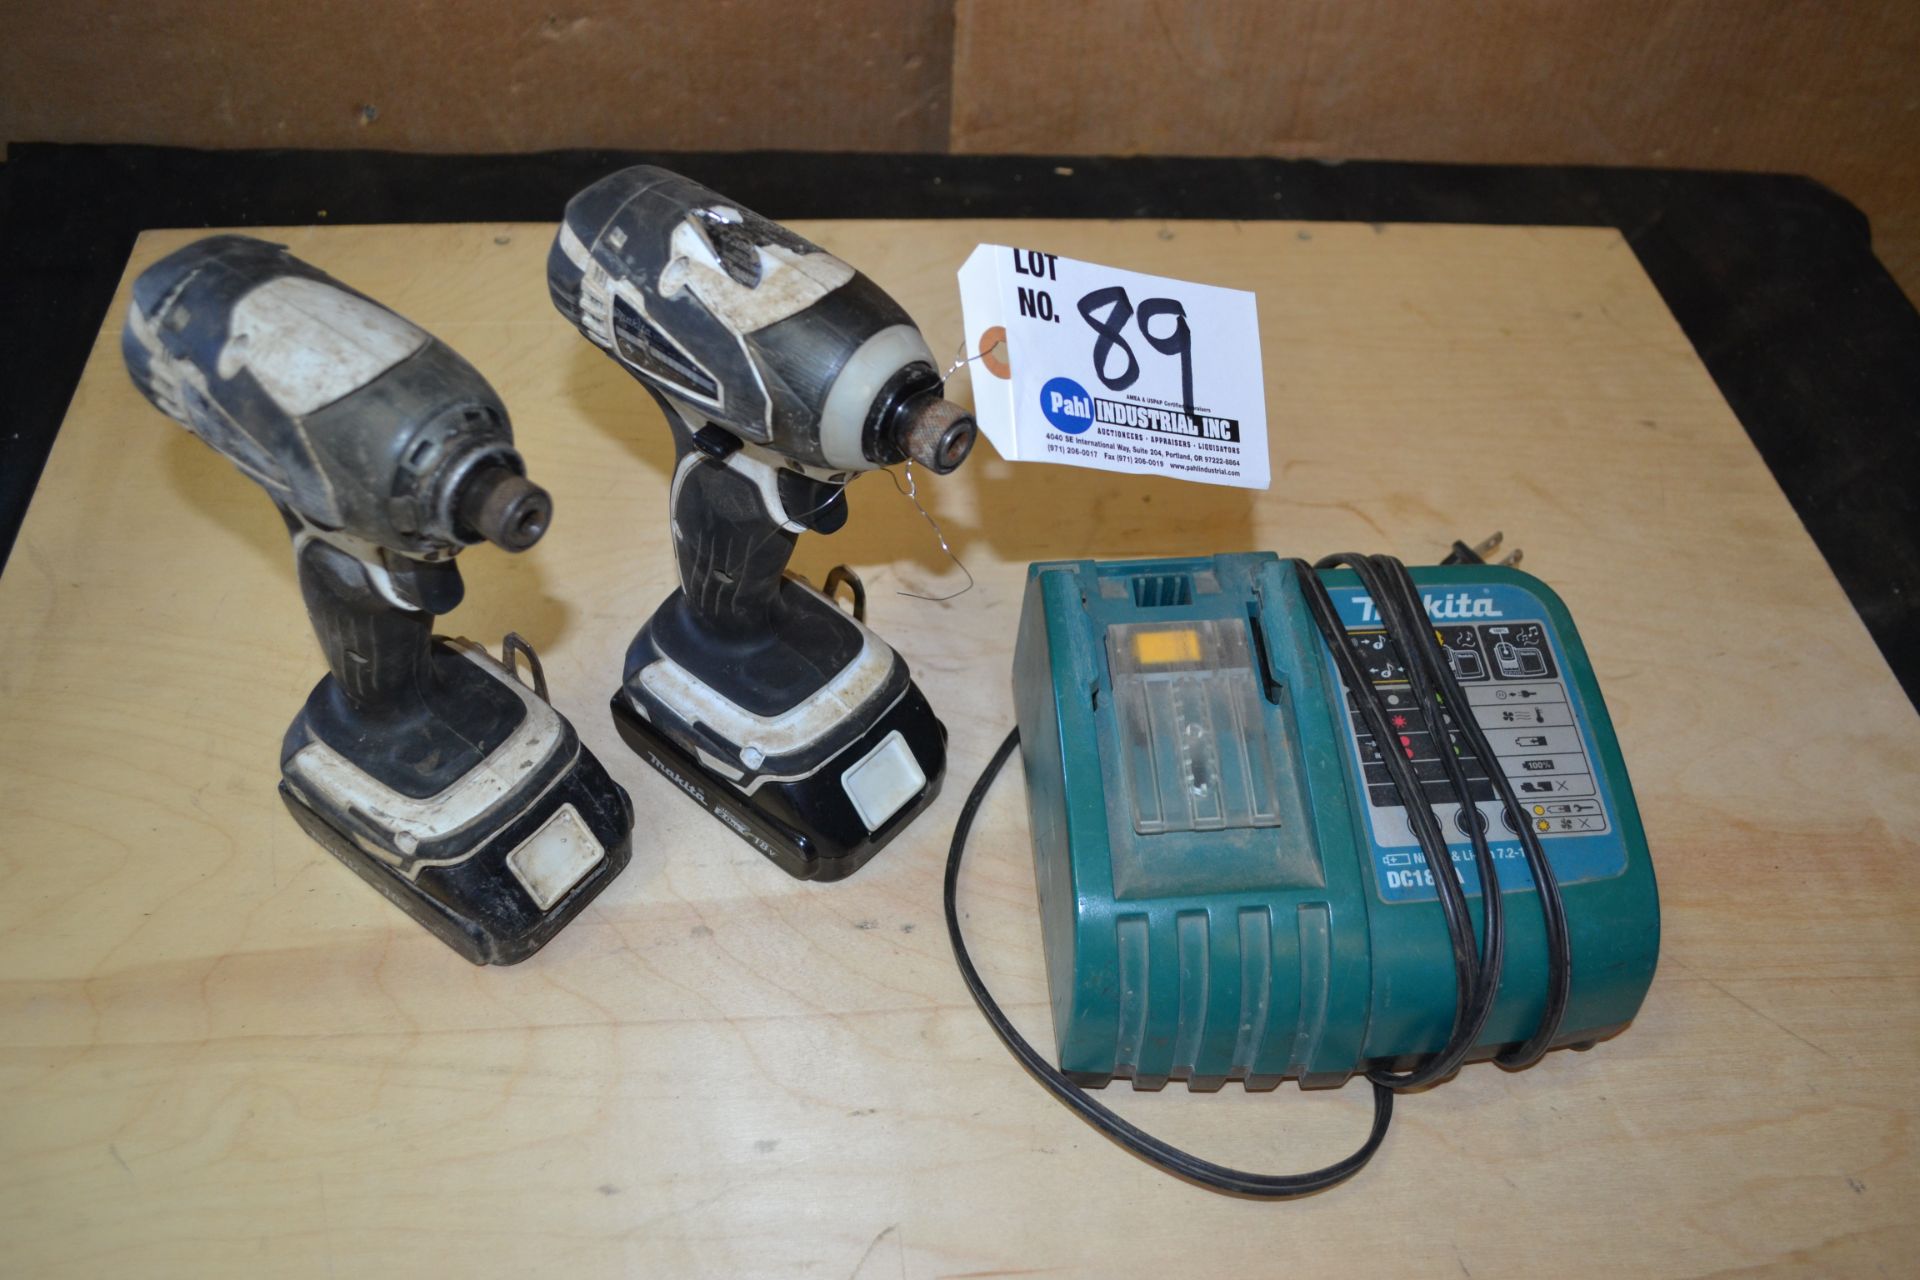 2 Makita XDT04 Cordless Impact Drivers c/w 2 Batteries, Charger